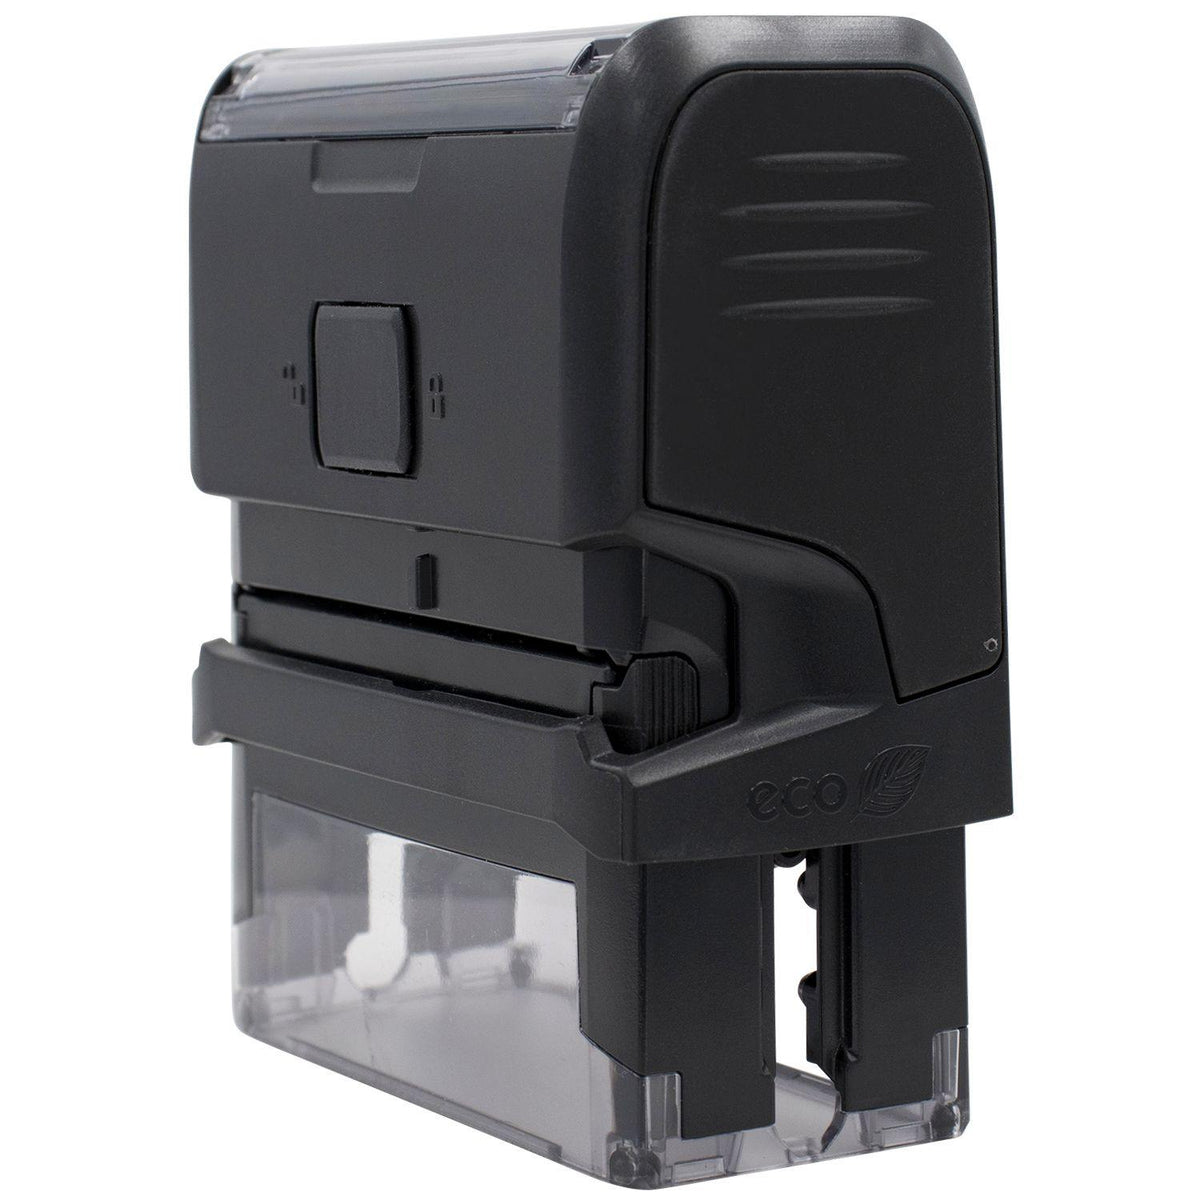 Side View of Large Self Inking Cash Stamp at an Angle